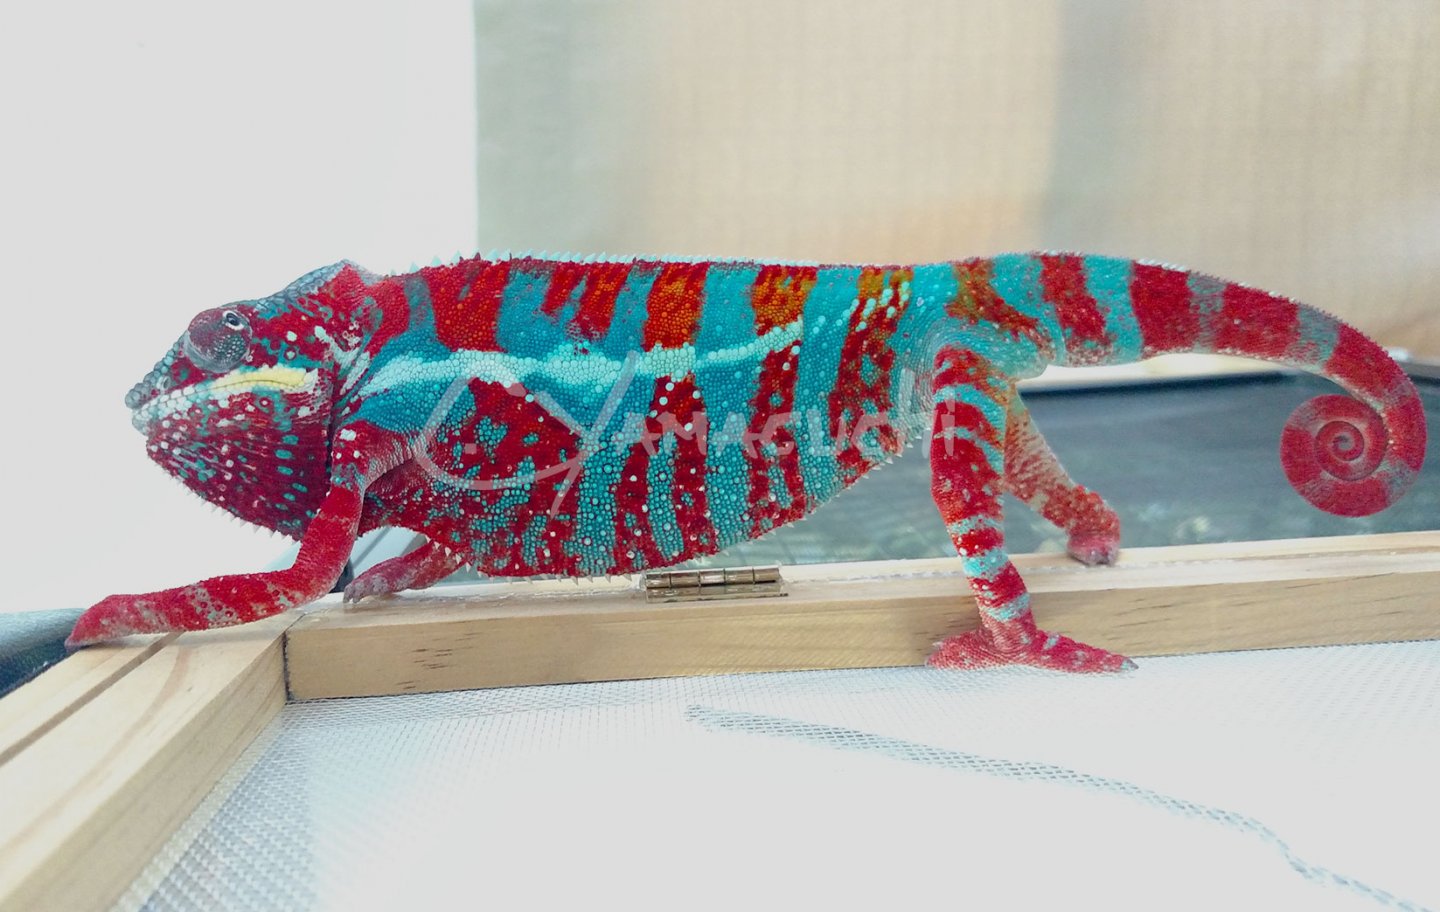 Lineage: Charles Yamaguchi | Panther Chameleon